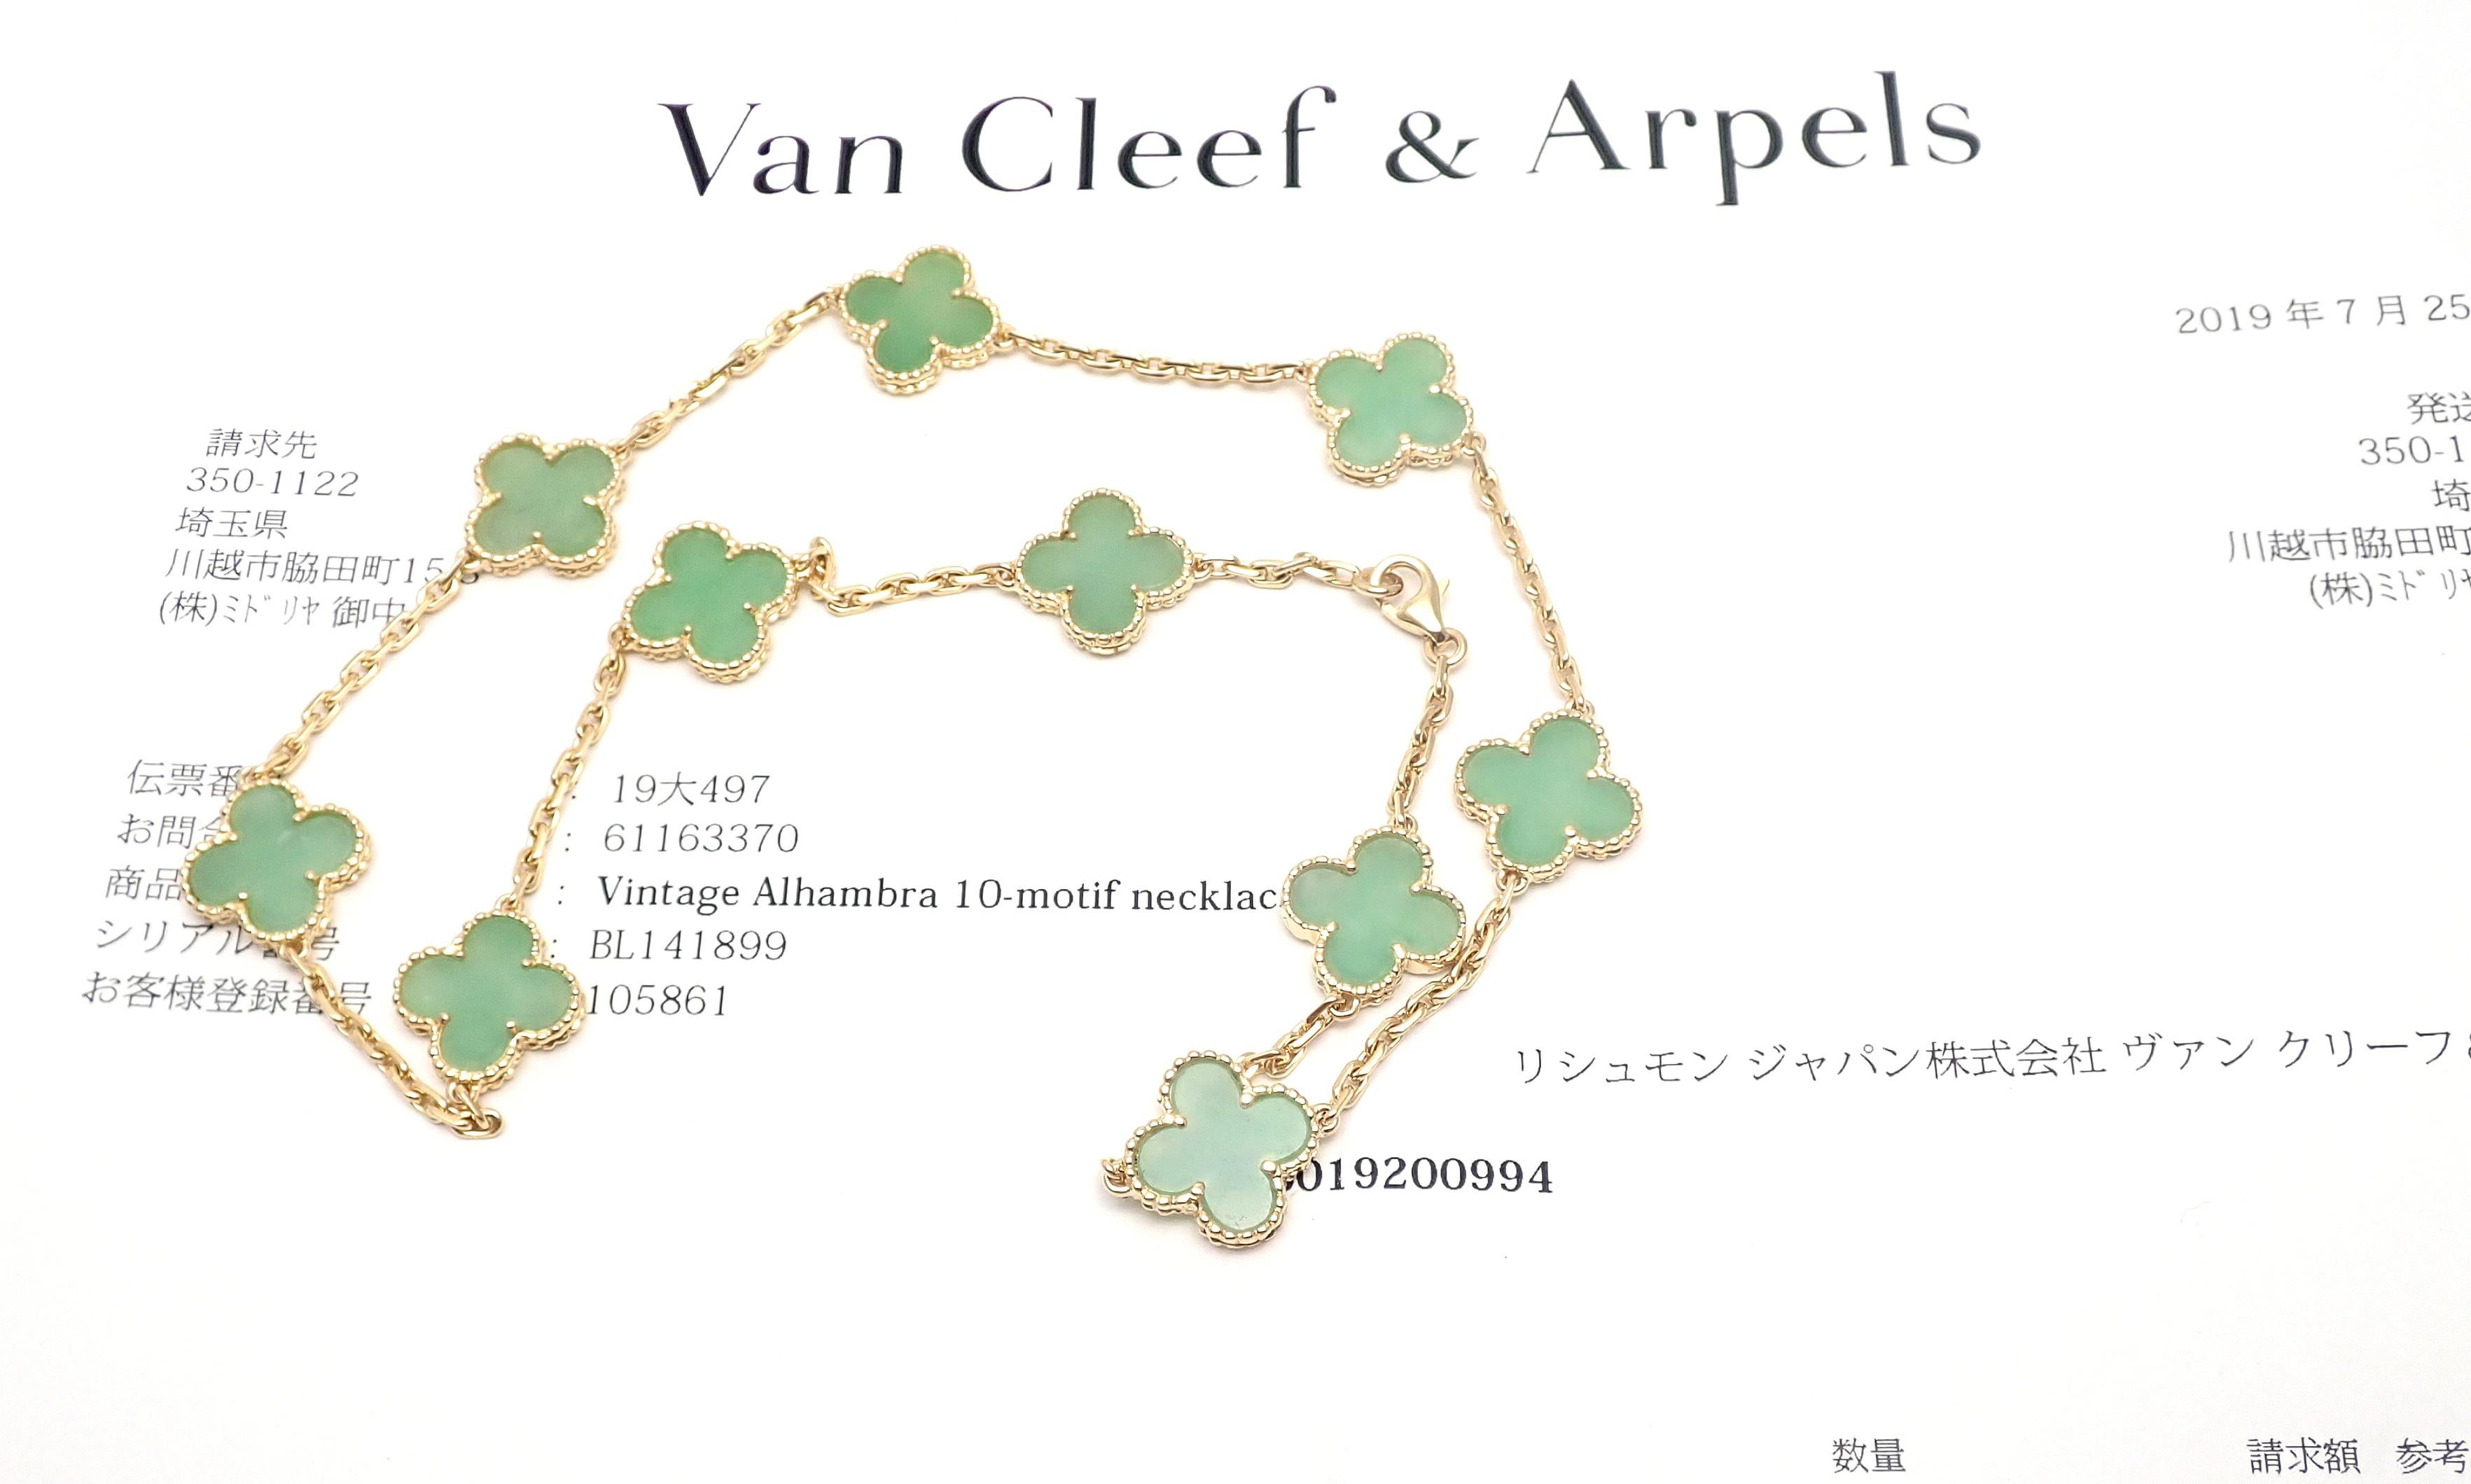 18k Yellow Gold Alhambra 10 Motifs Jade Necklace by Van Cleef & Arpels. 
With 10 motifs of jade alhambra stones 15mm each
This necklace comes with service paper from VCA store.
Details: 
Length: 17'' necklace
Width: 15mm
Weight: 22.6 grams
Stamped